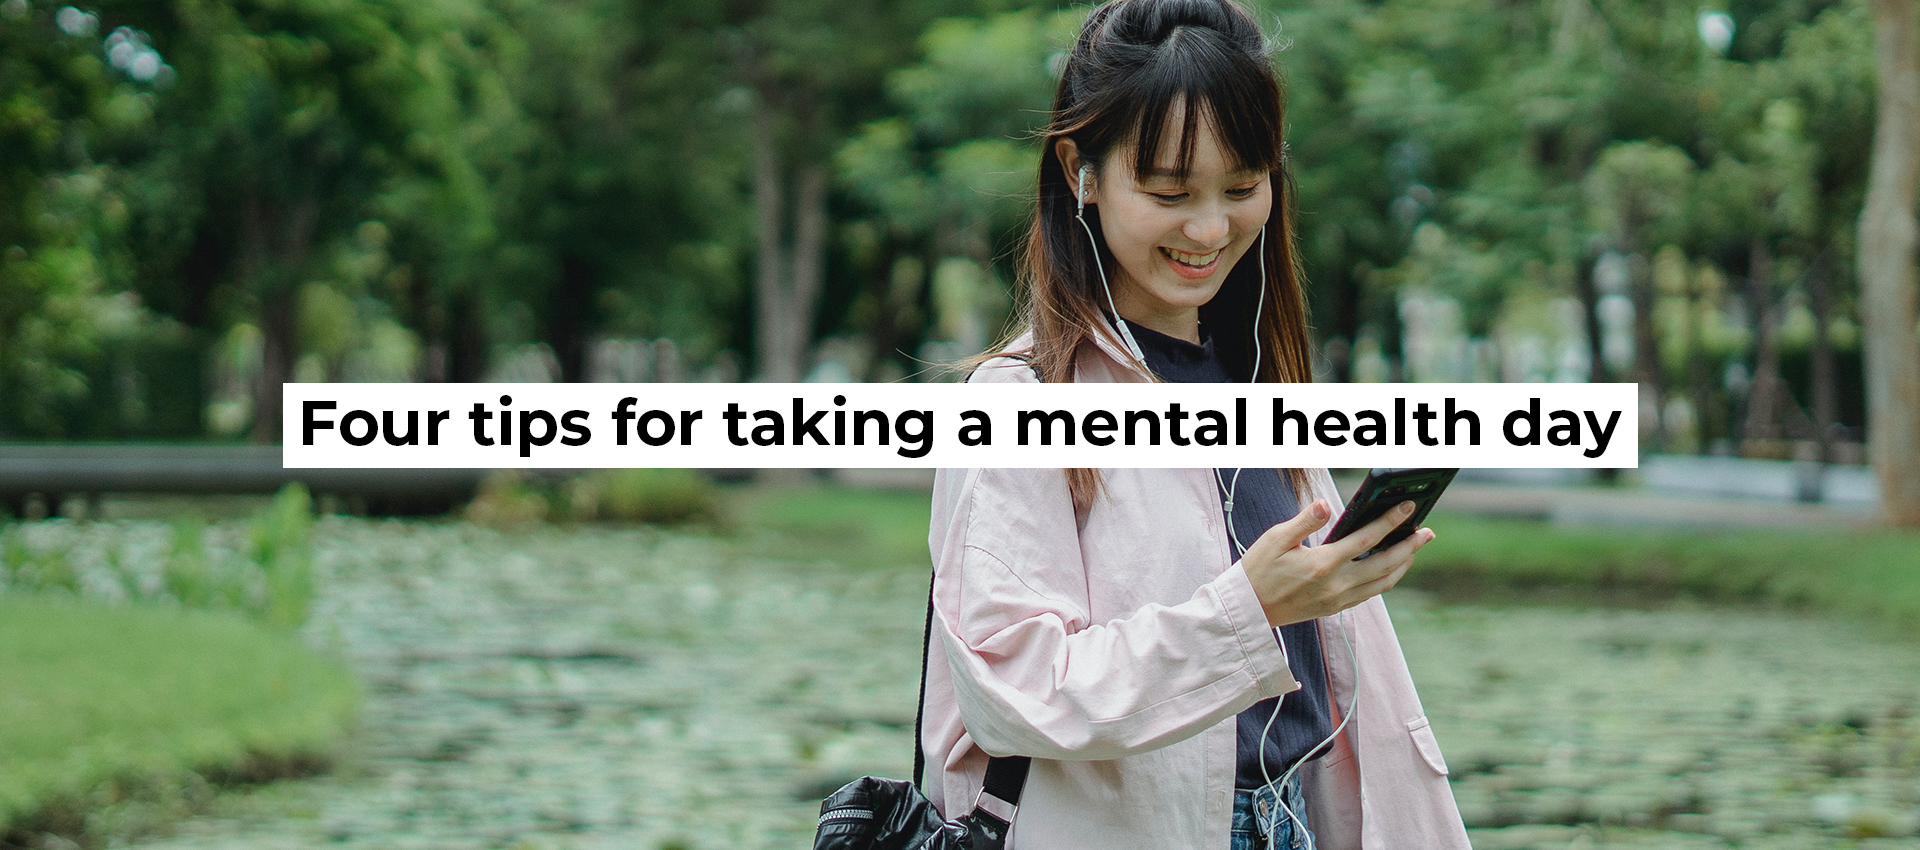 Four tips for taking a mental health day